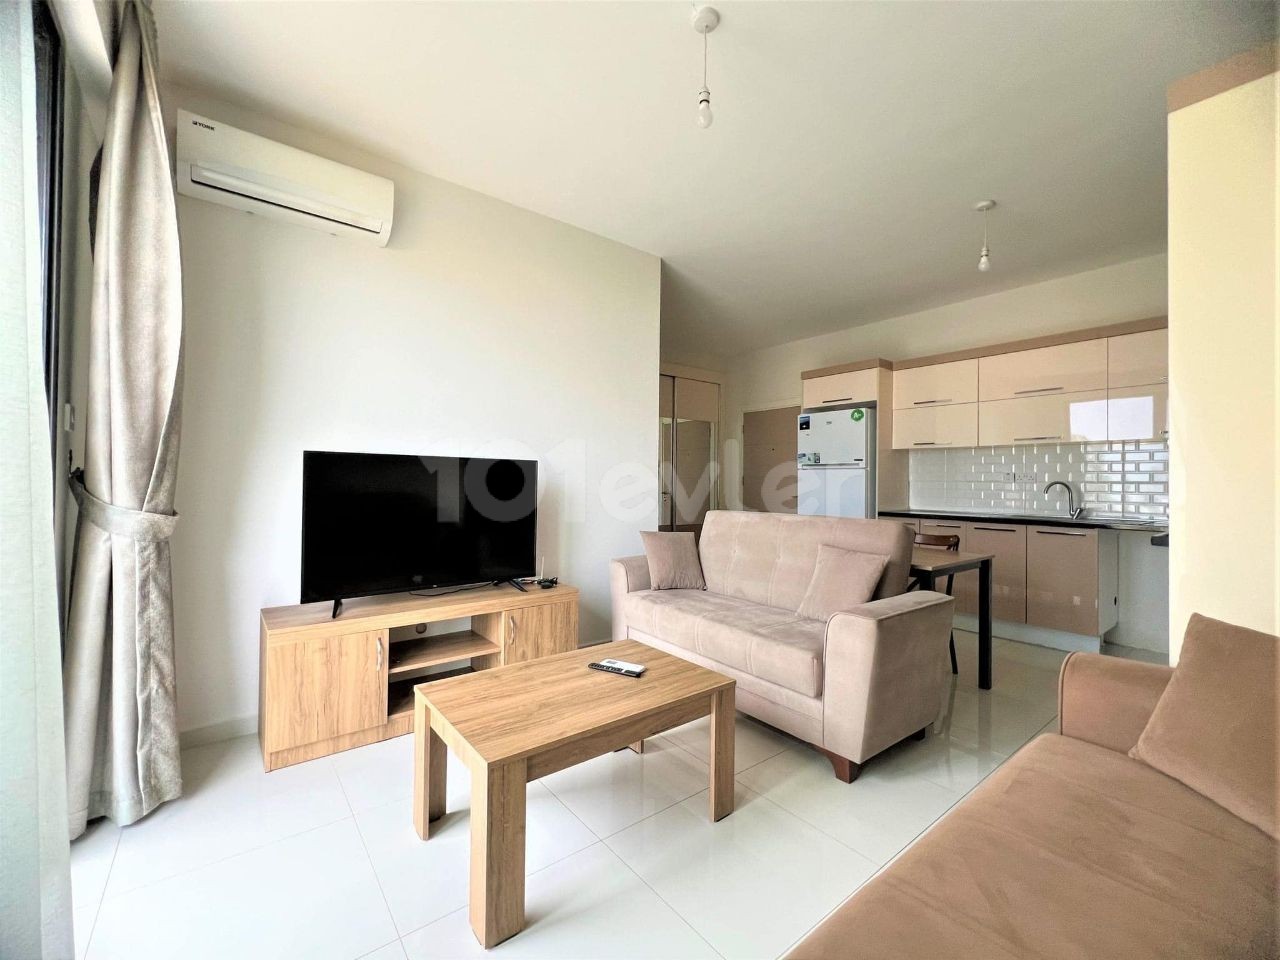 2+1 Clean Flat for Rent in Kaymaklı Area